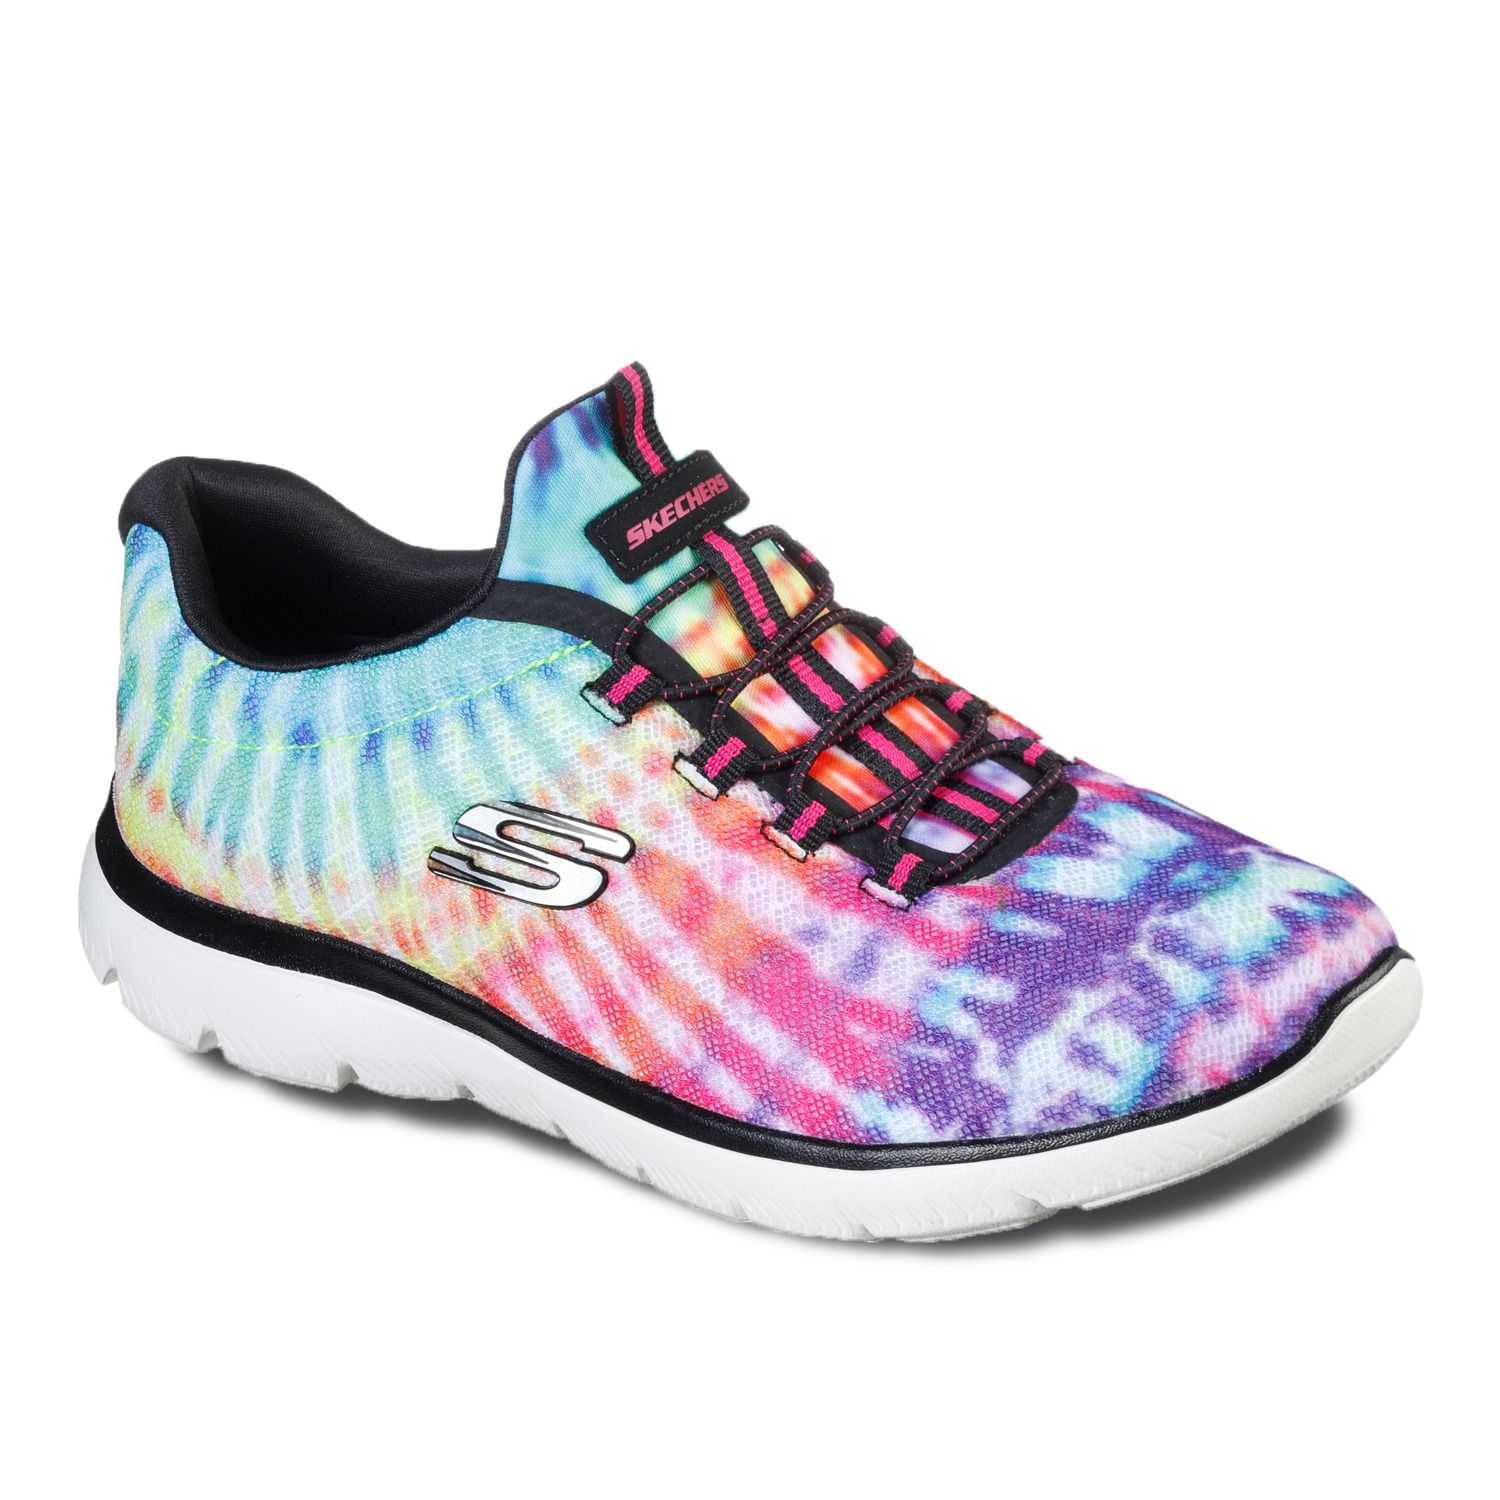 Clearance Womens Skechers Shoes | Kohl's